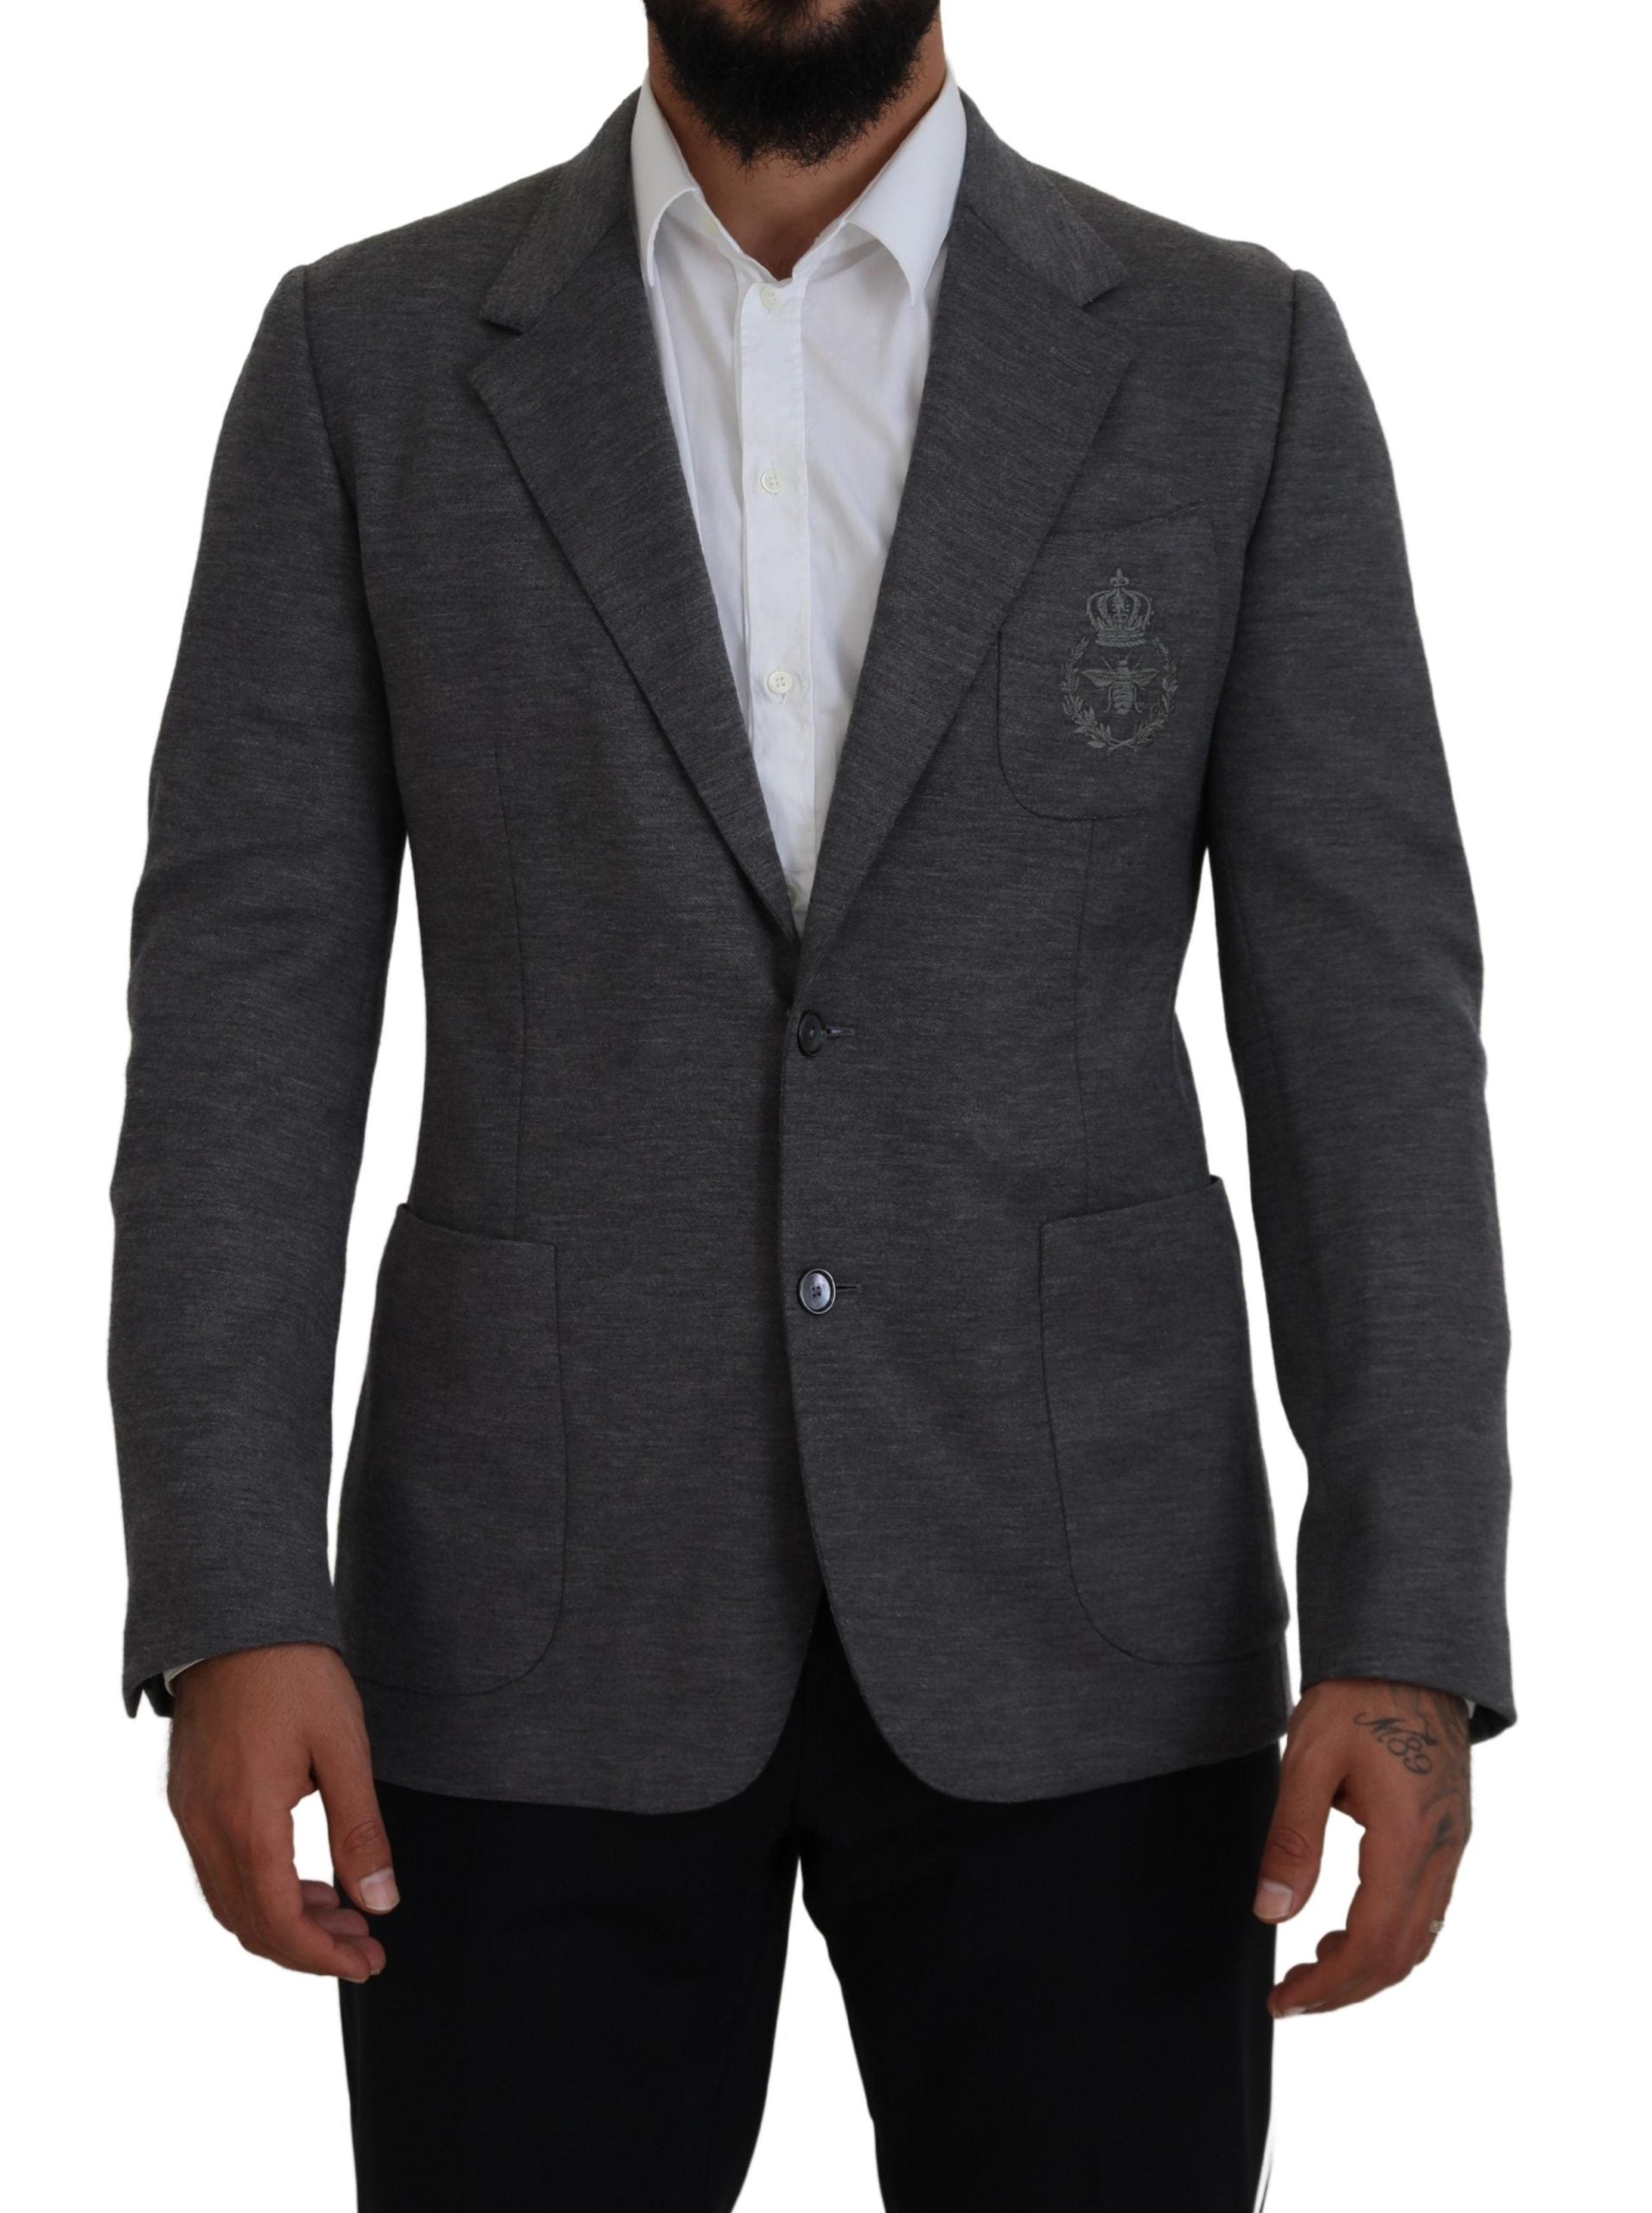 Dolce & Gabbana Elegant Gray Wool Blazer with Bee Crown Embroidery